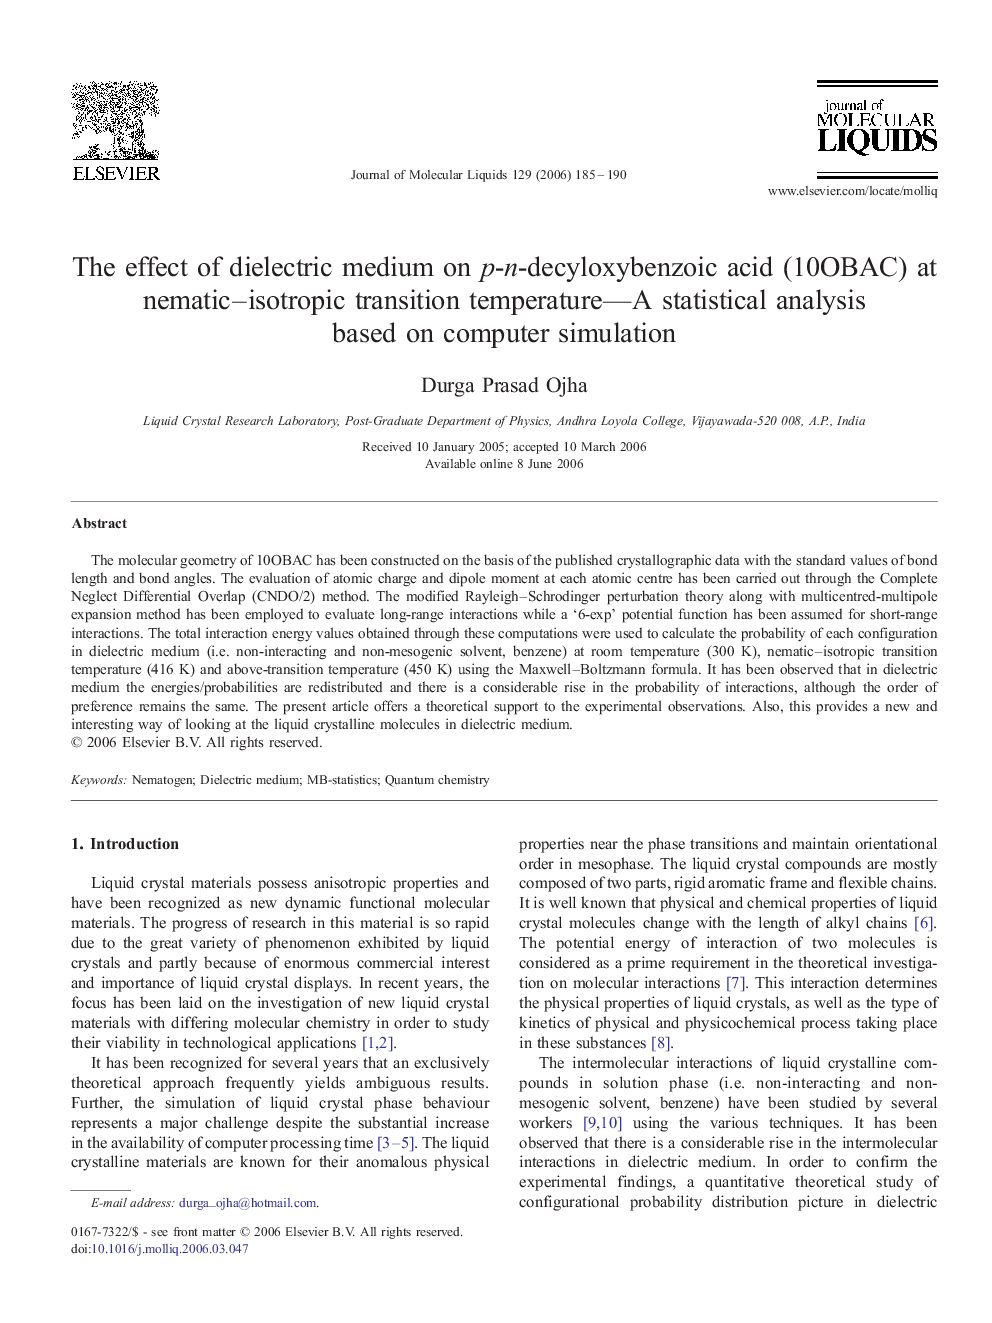 The effect of dielectric medium on p-n-decyloxybenzoic acid (10OBAC) at nematic-isotropic transition temperature-A statistical analysis based on computer simulation